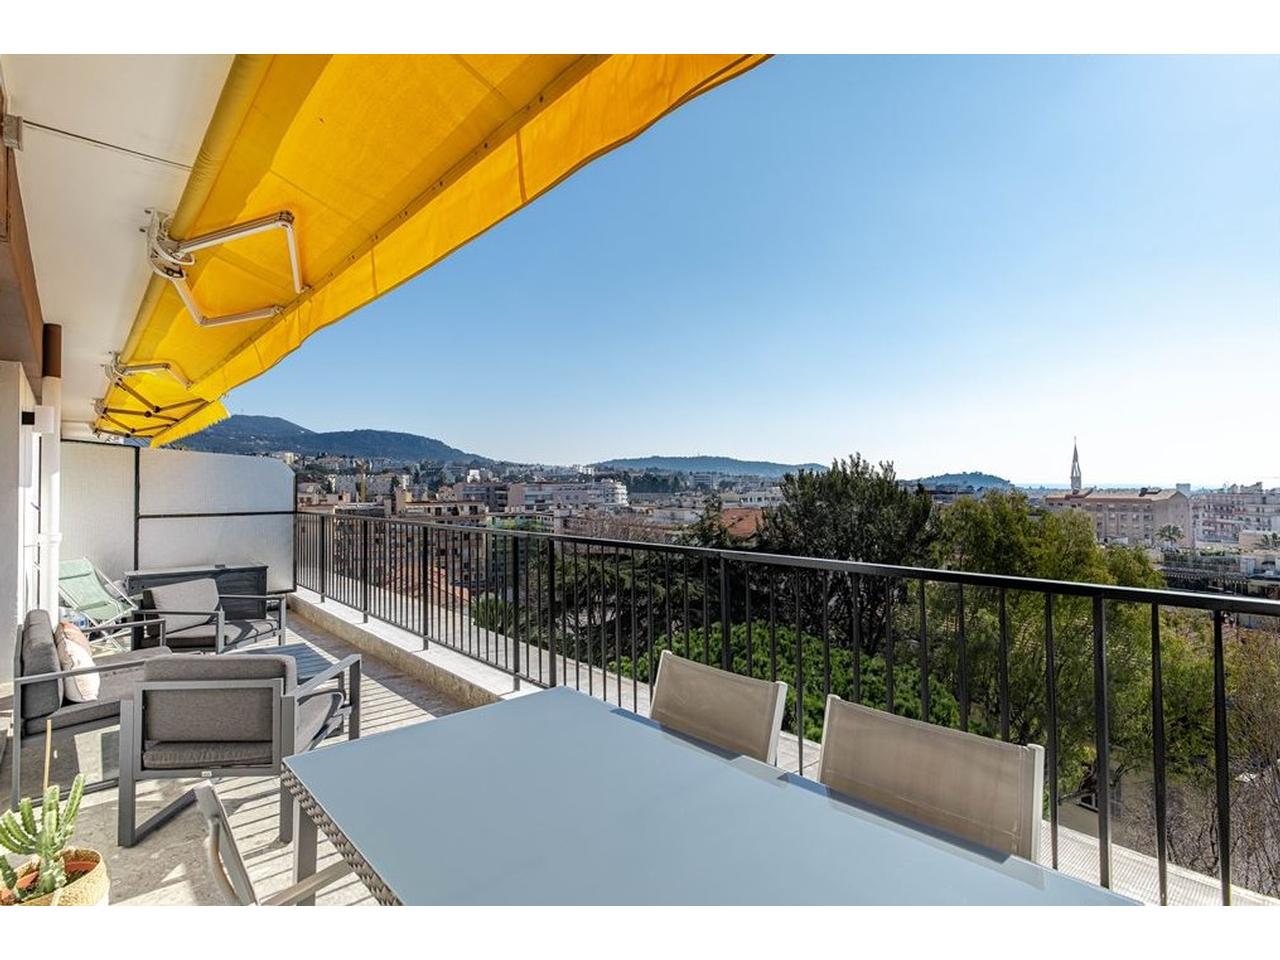 Nice Riviera - Agence Immobiliére Nice Côte d'Azur | Appartement  5 Rooms 100m2  for sale  1 250 000 €